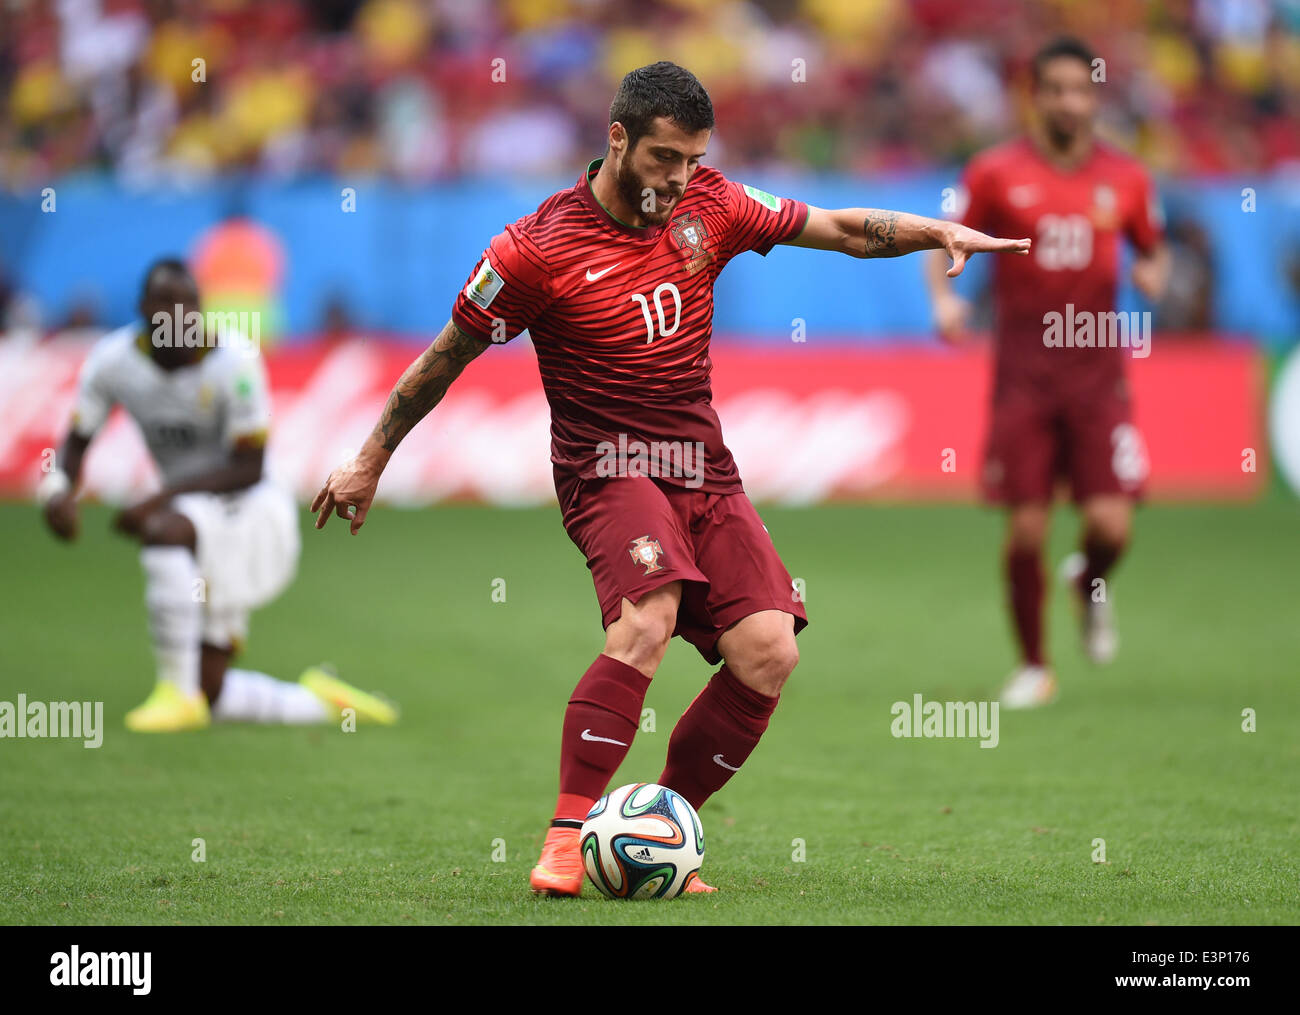 Brasilia, Brazil. 26th June, 2014. Vieirinha of Portugal in action during the FIFA World Cup 2014 group G preliminary round match between Portugal and Ghana at the Estadio National Stadium in Brasilia, Brazil, on 26 June 2014 Credit: © dpa picture alliance/Alamy Live News  Stock Photo